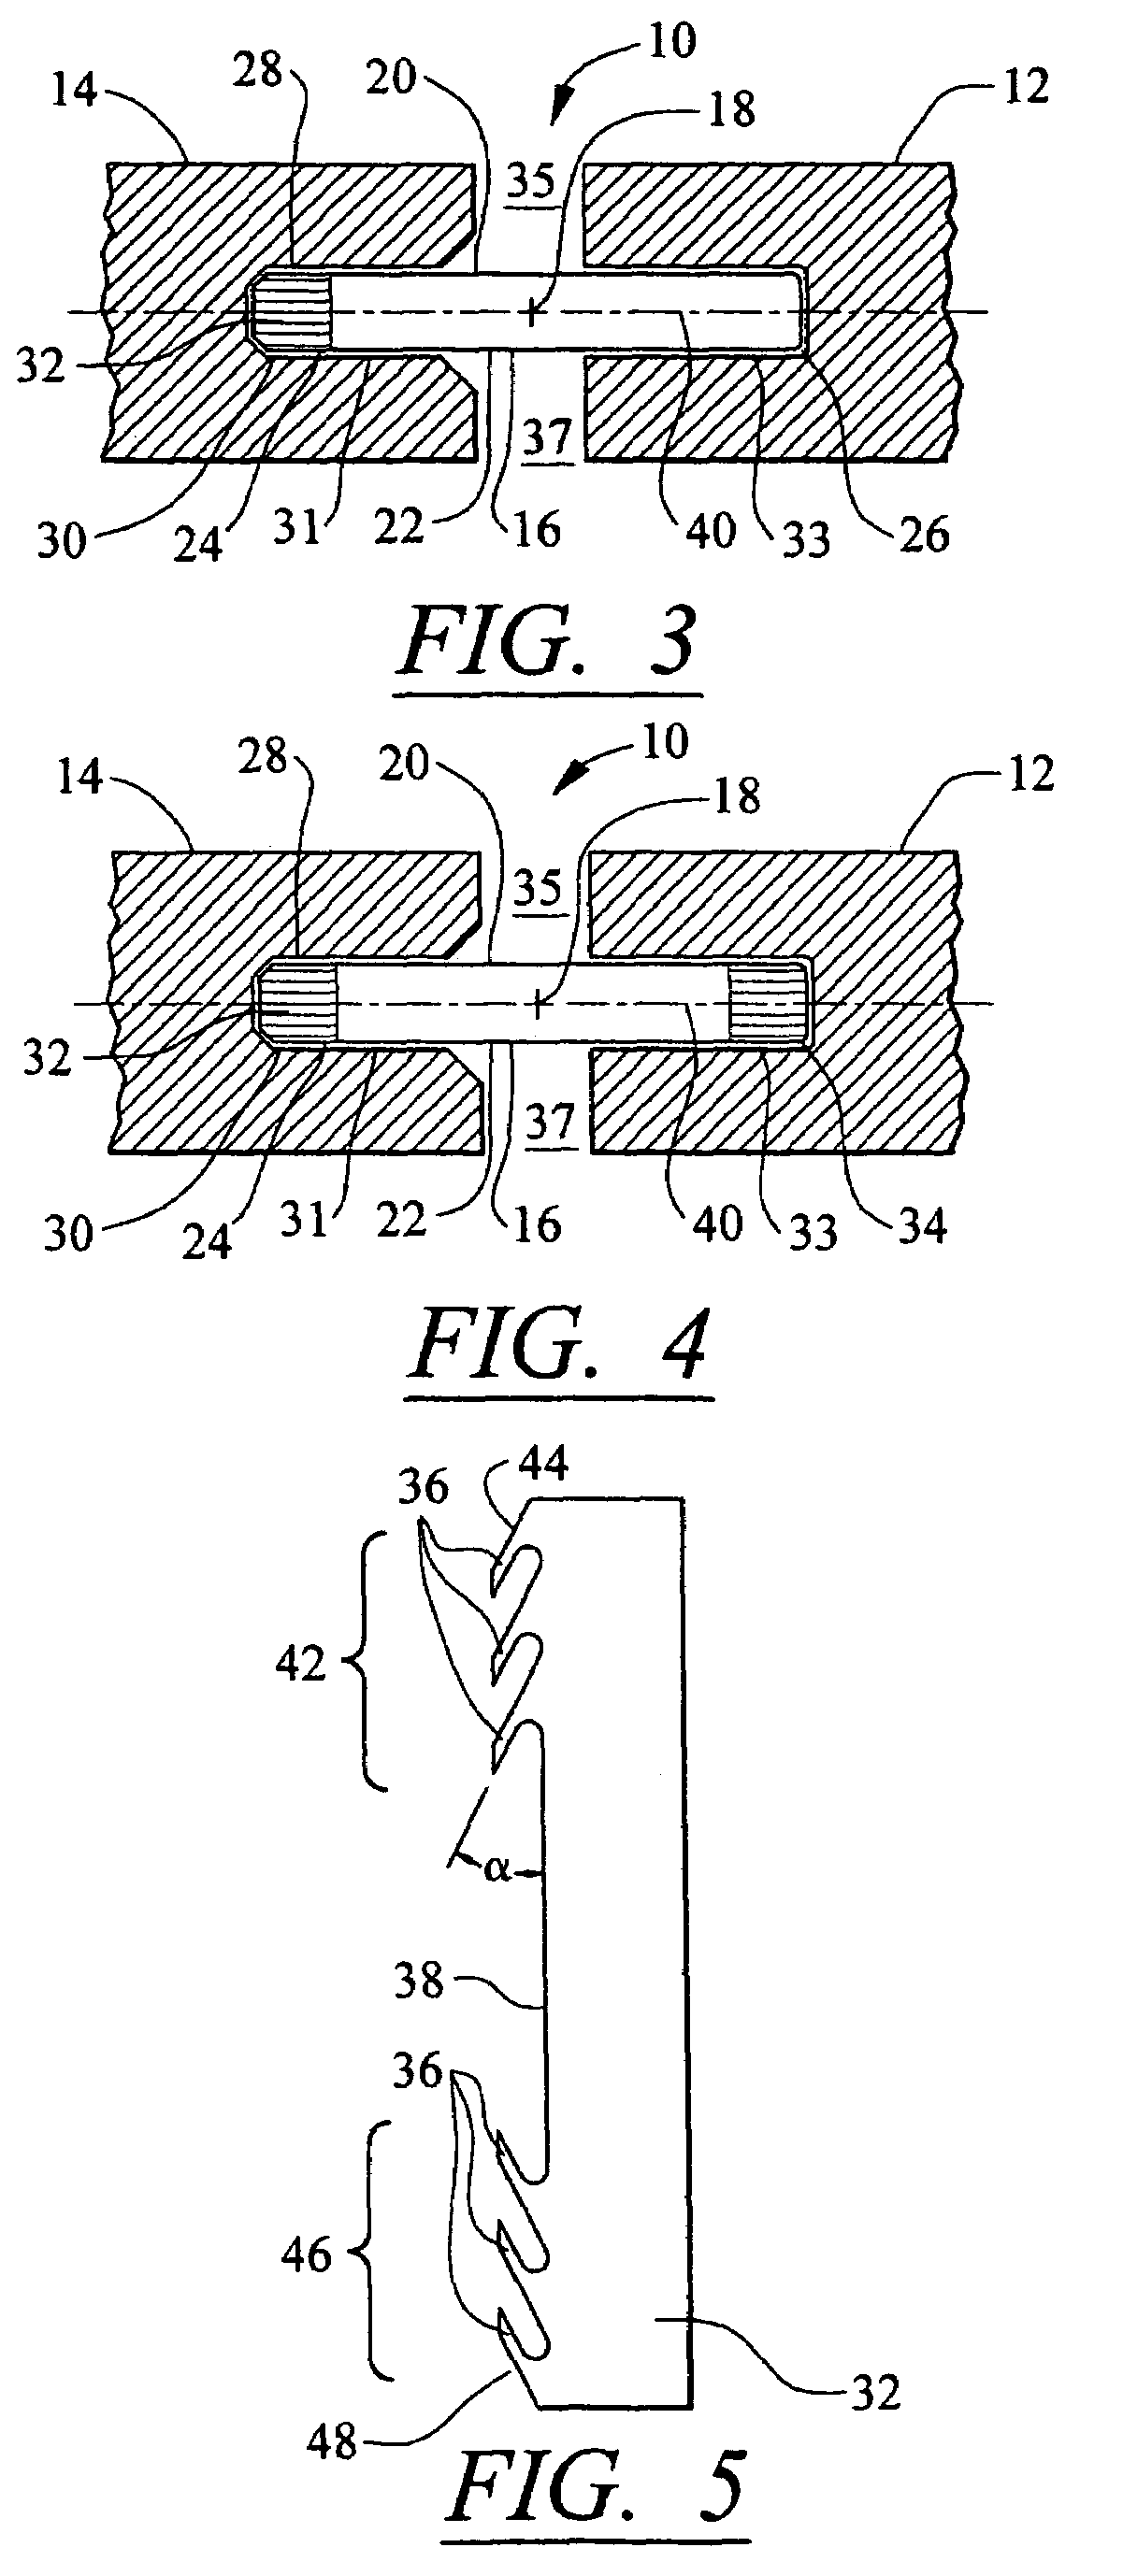 Seal usable between thermally movable components